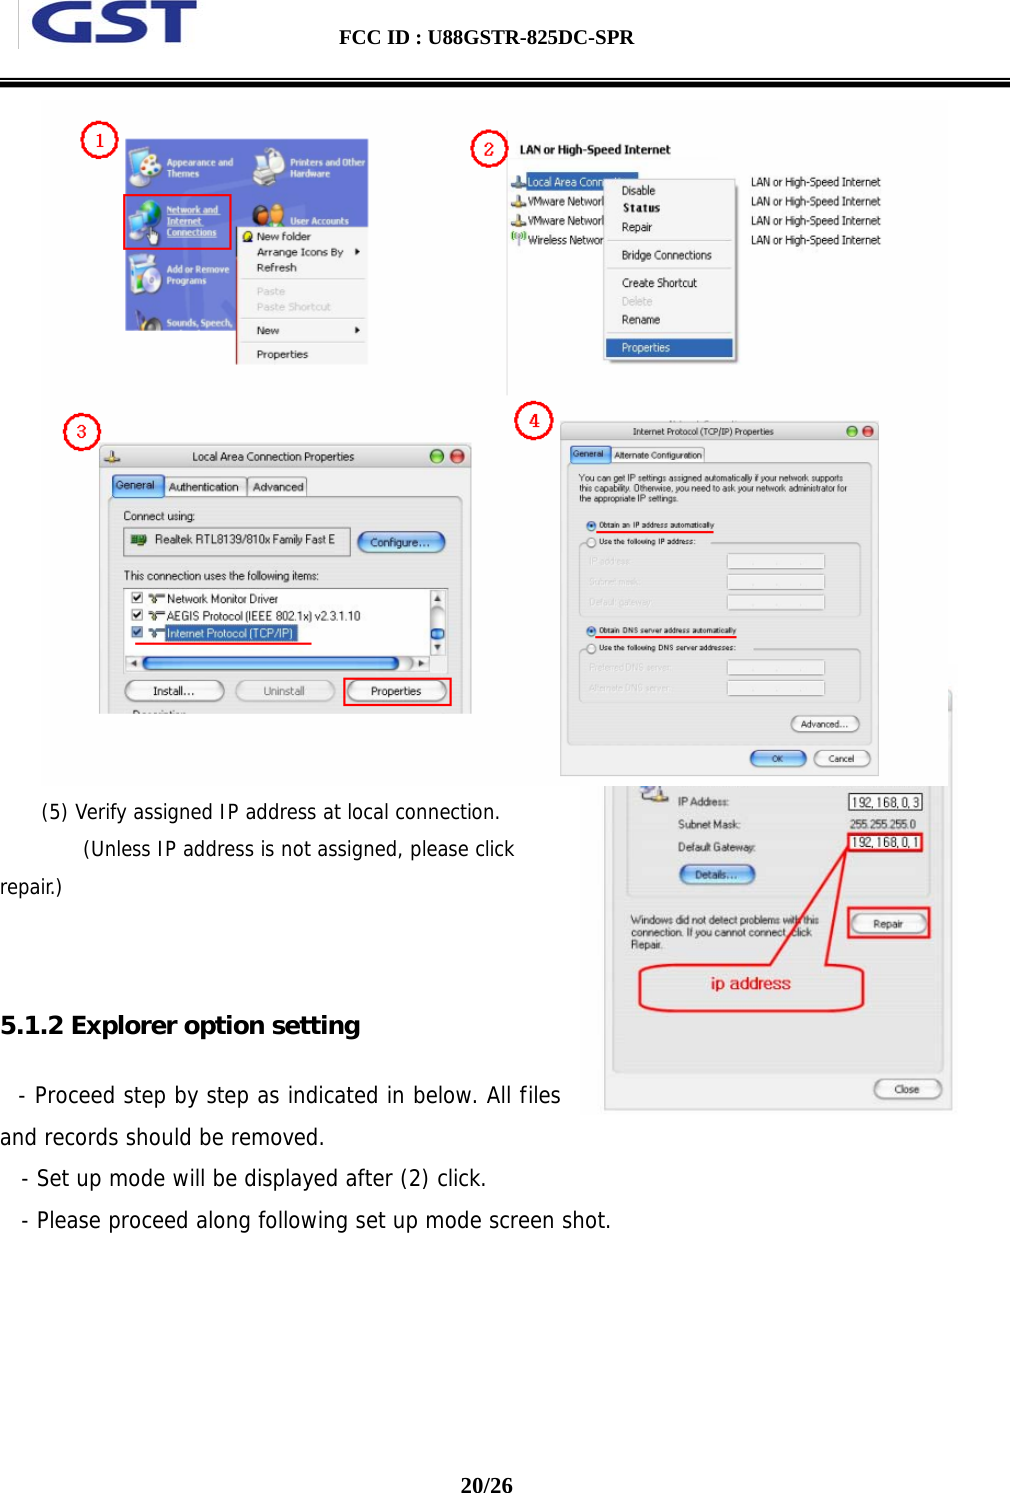  FCC ID : U88GSTR-825DC-SPR                                                                                          20/26   (5) Verify assigned IP address at local connection.   (Unless IP address is not assigned, please click repair.)    5.1.2 Explorer option setting     - Proceed step by step as indicated in below. All files and records should be removed.     - Set up mode will be displayed after (2) click.    - Please proceed along following set up mode screen shot.  